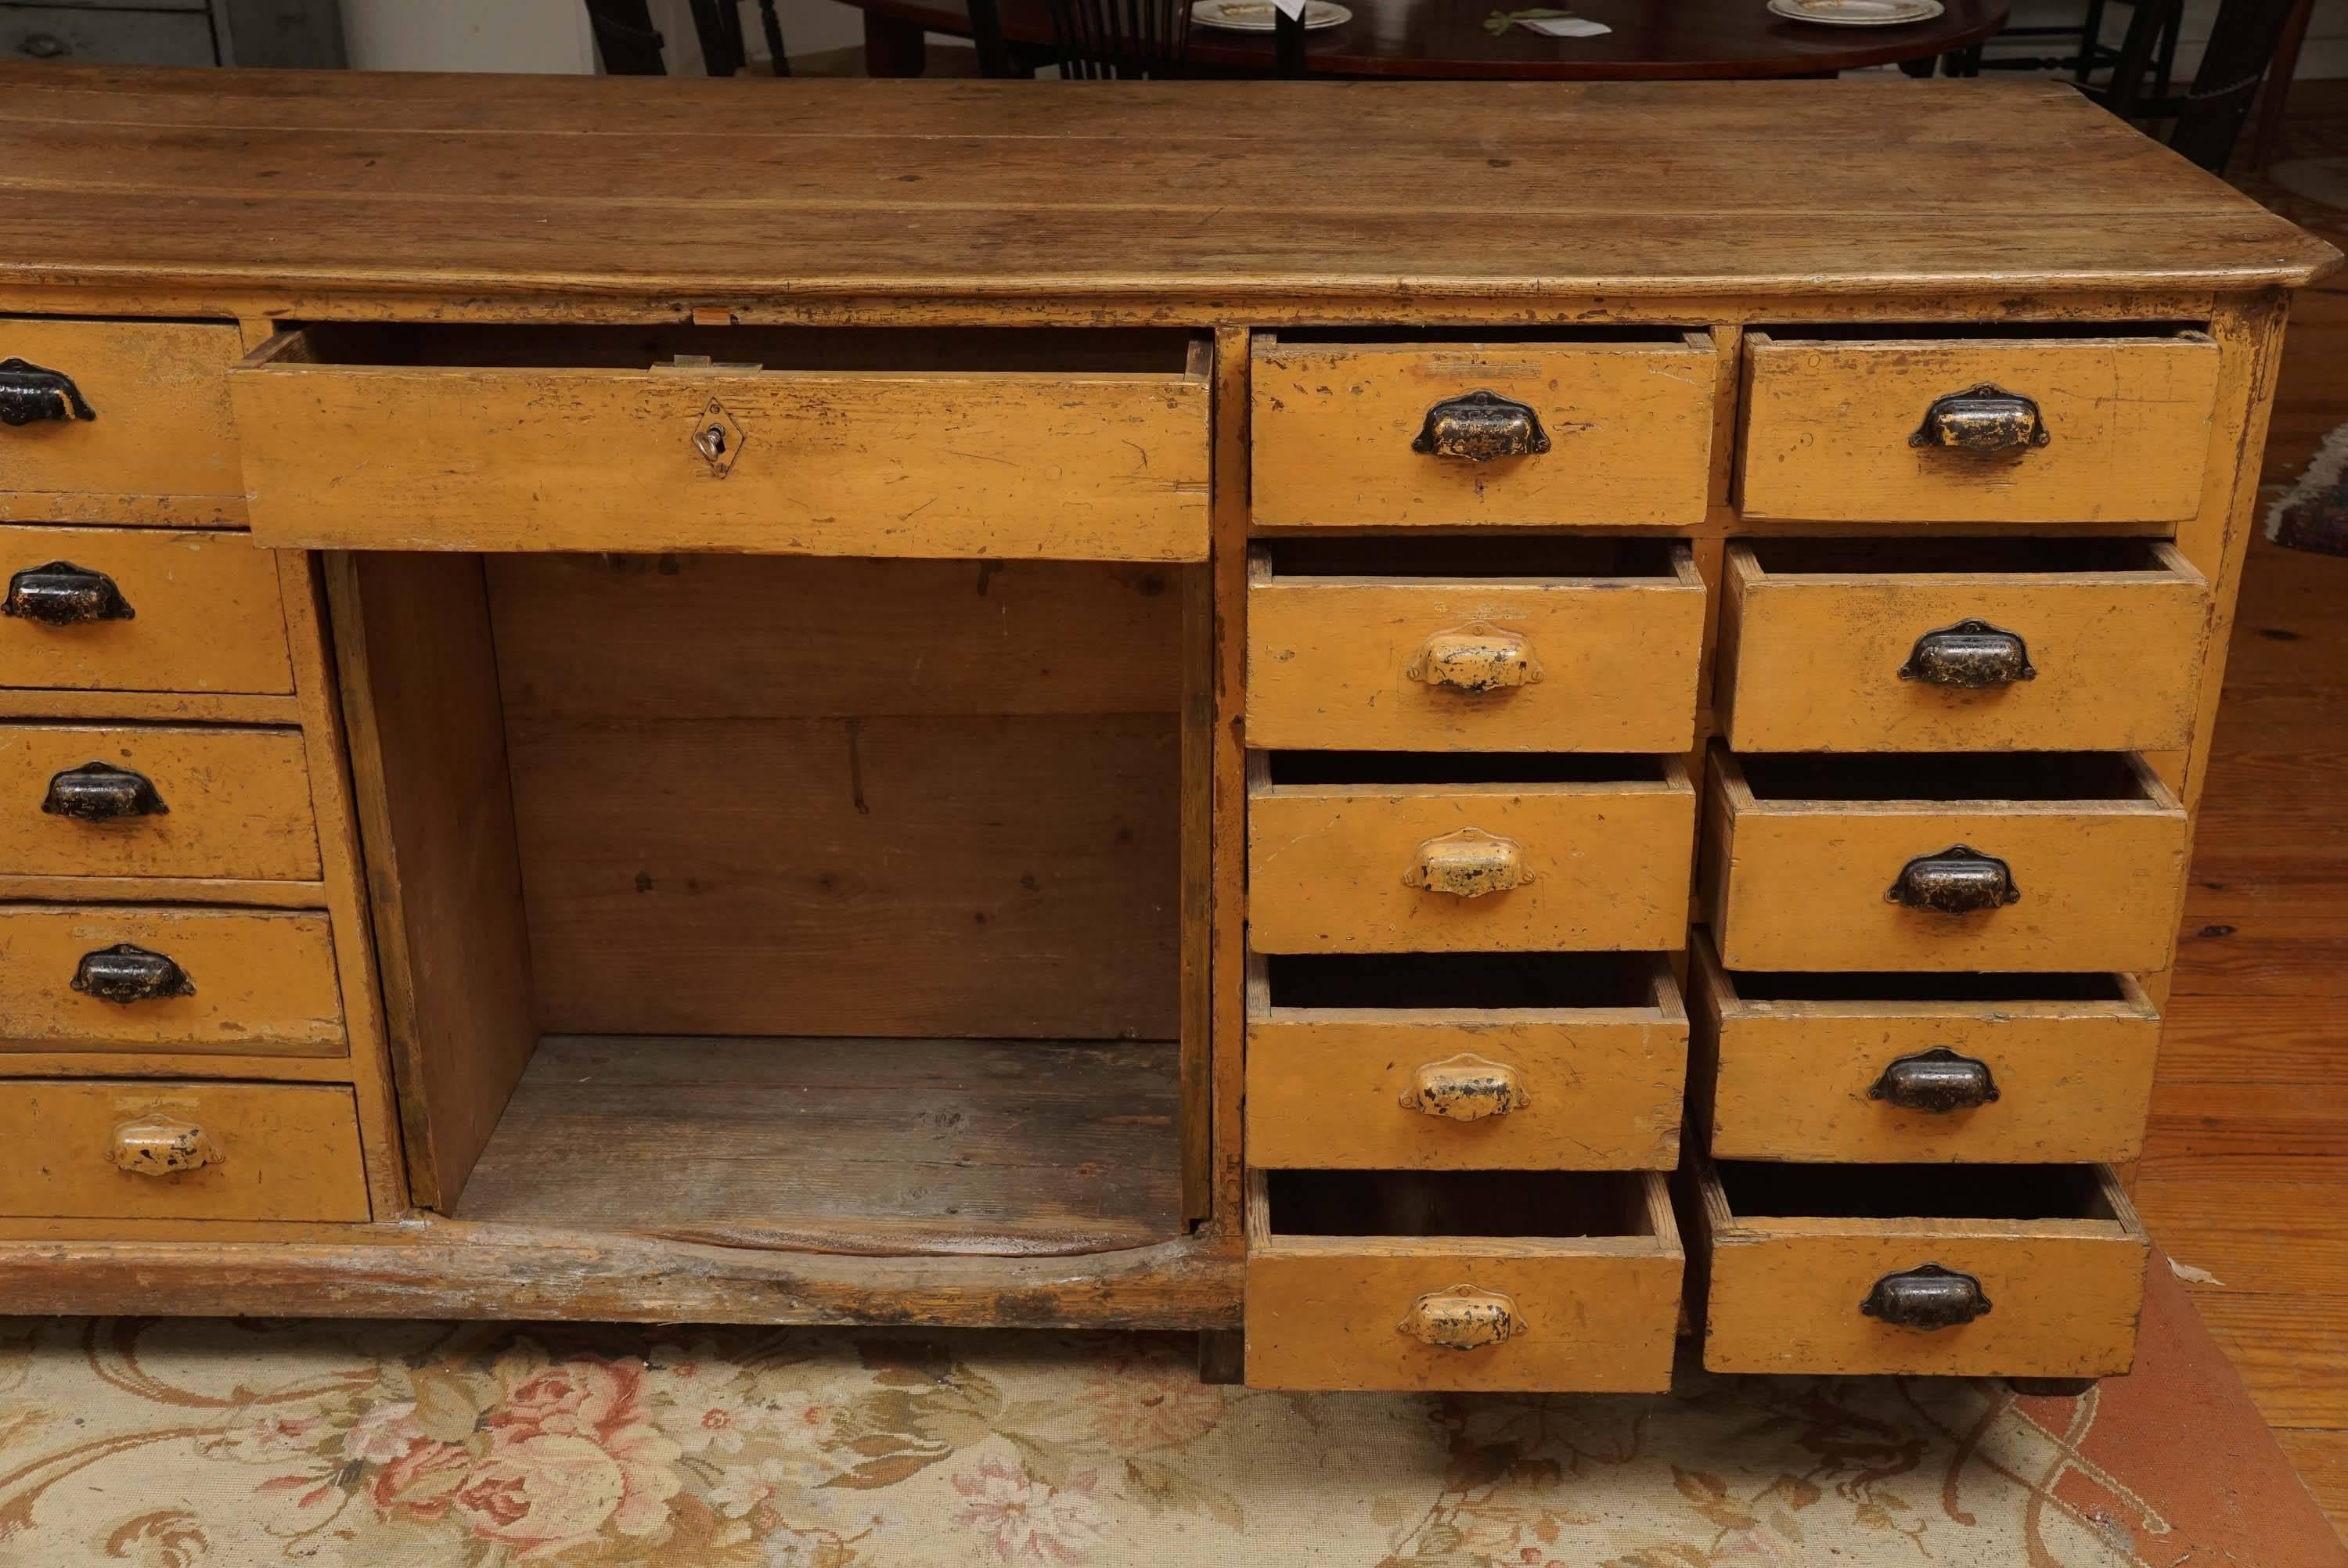 Late 19th Century French Hardware Store Counter with Drawers on Both Sides